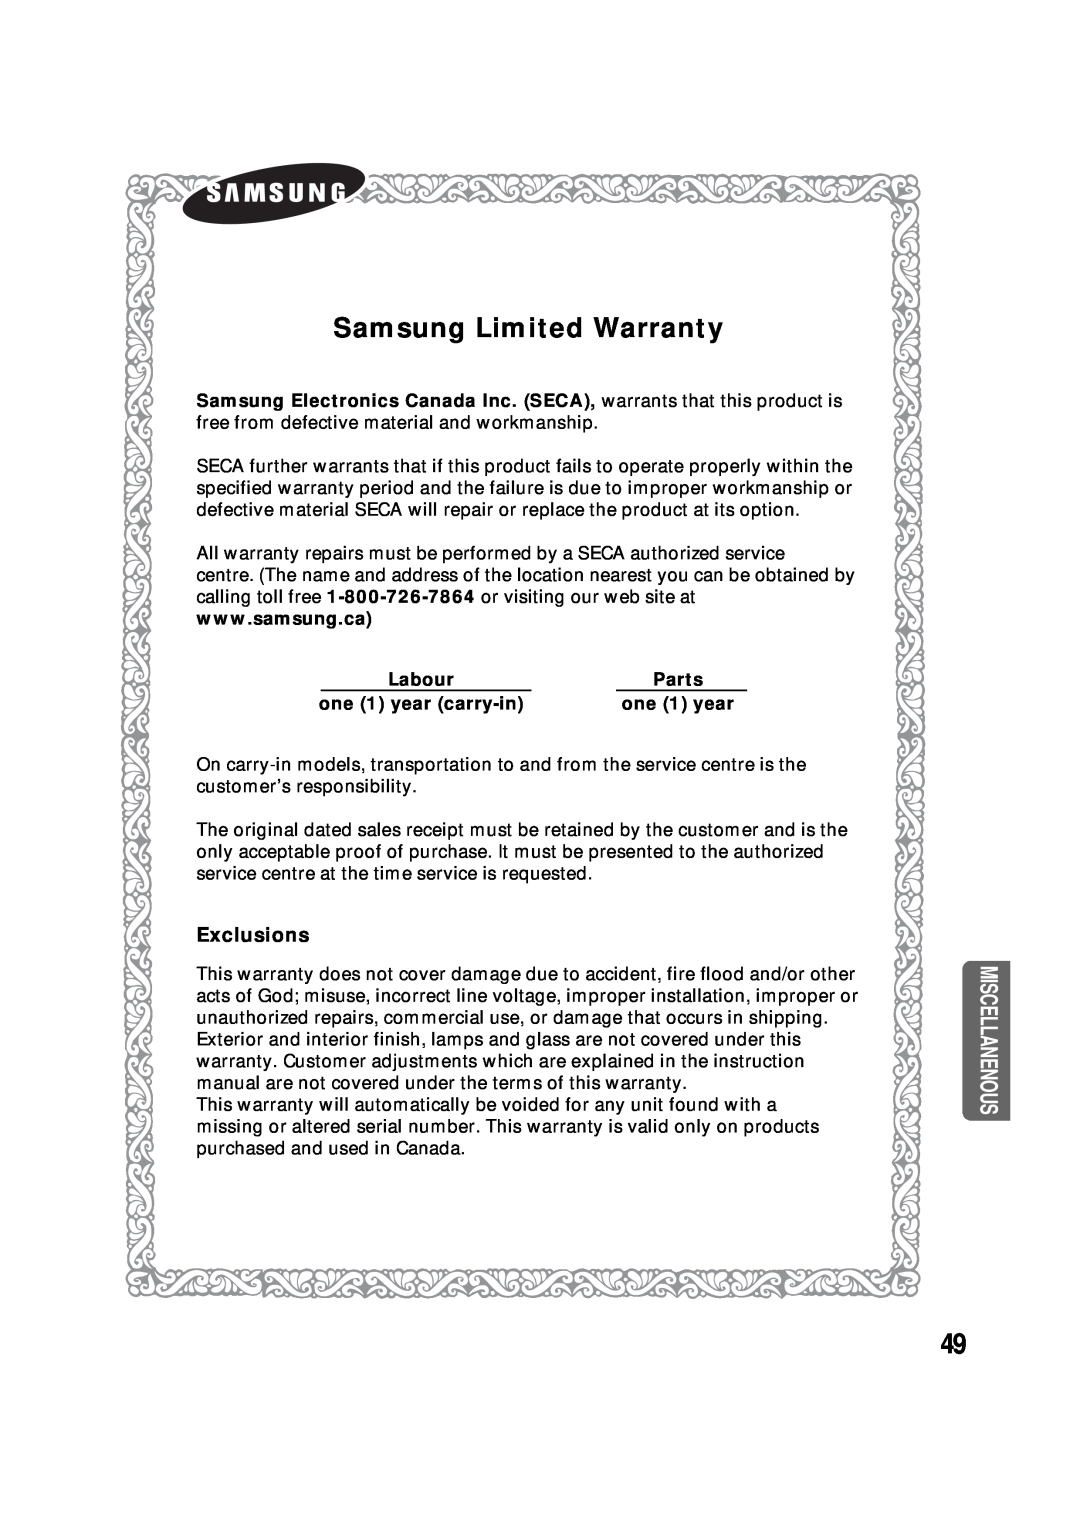 Samsung AV-R610, 20060510083254531, AH68-01853S Samsung Limited Warranty, Exclusions, Labour, Parts, one 1 year carry-in 